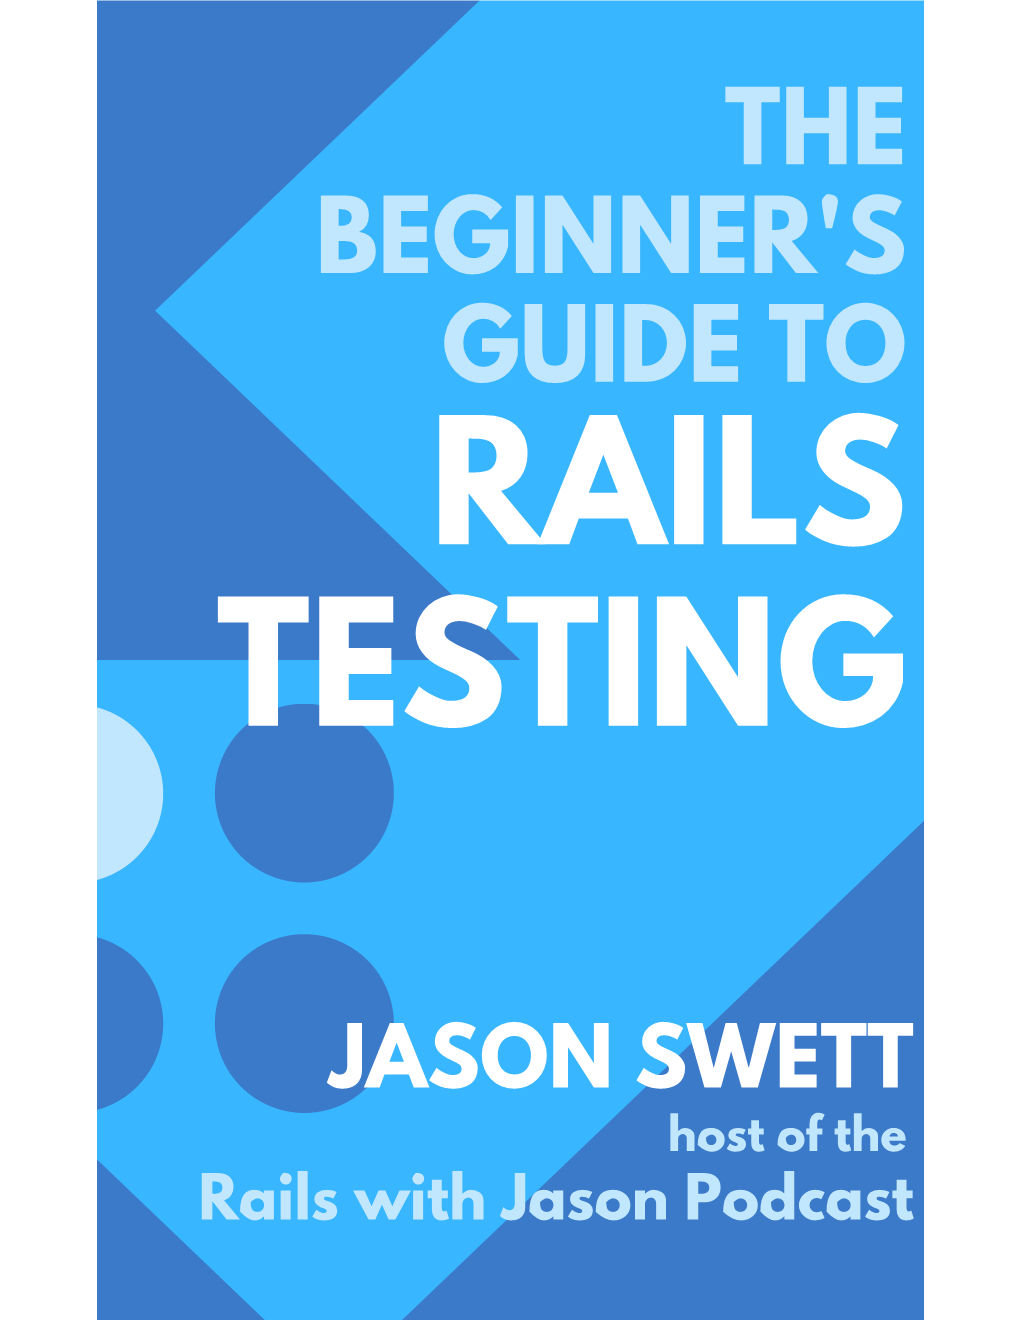 The Beginner's Guide to Rails Testing